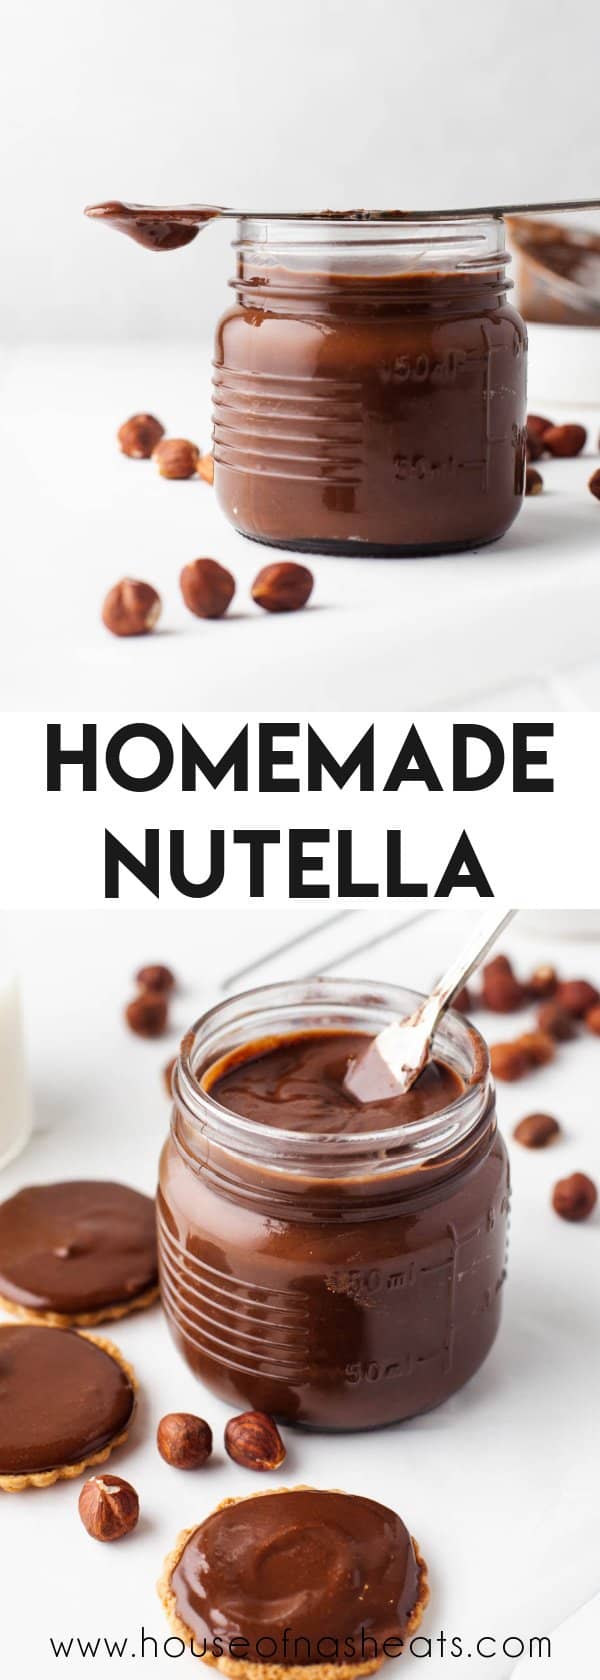 A collage of images of homemade nutella in a glass jar with text overlay.